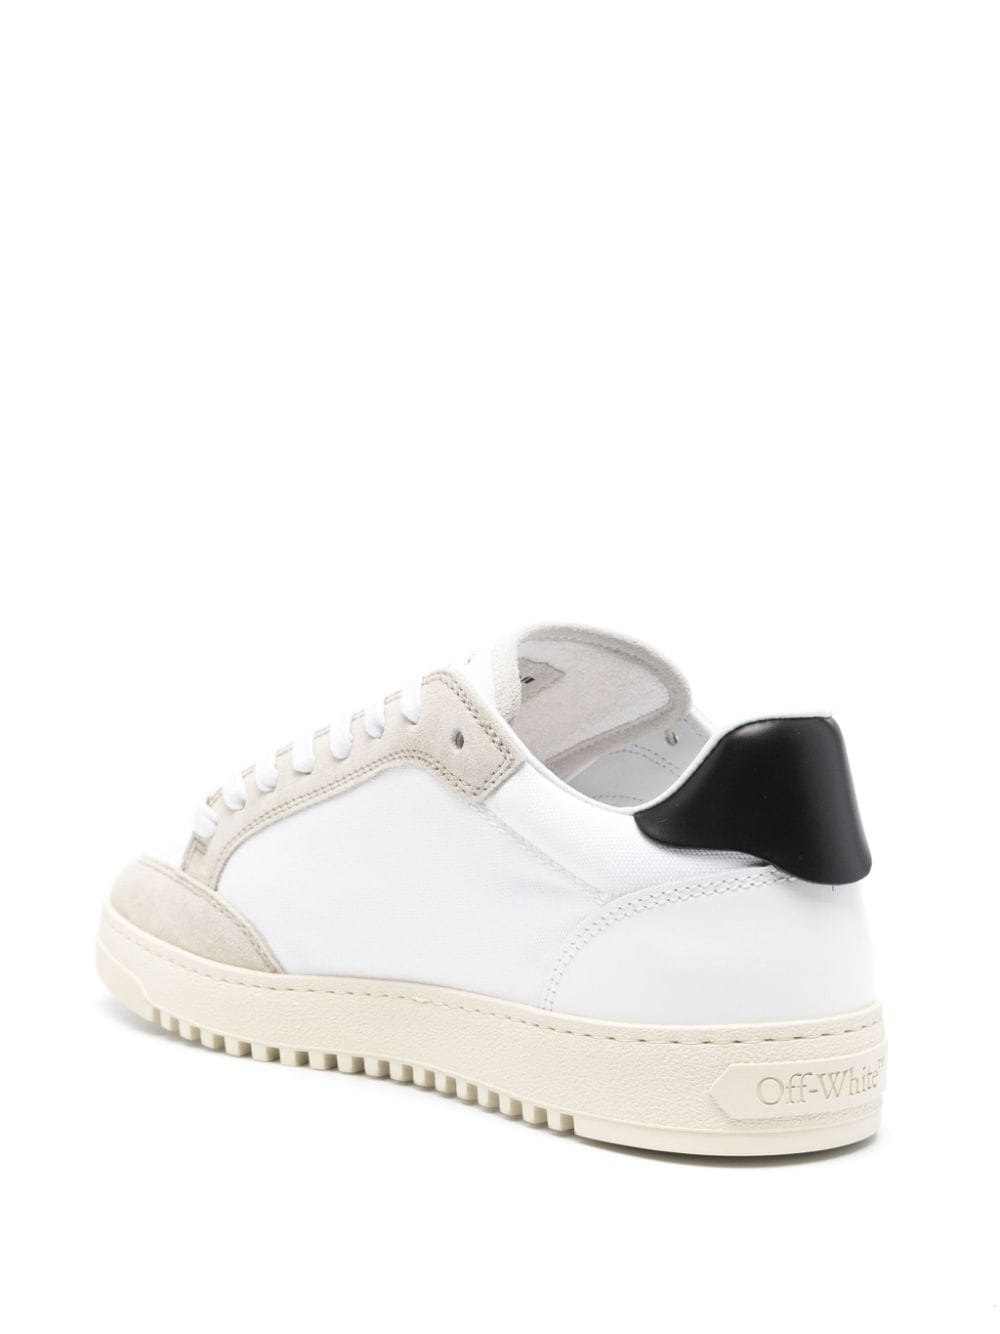 Shop Off-white 5.0 Leather Sneakers In White Black